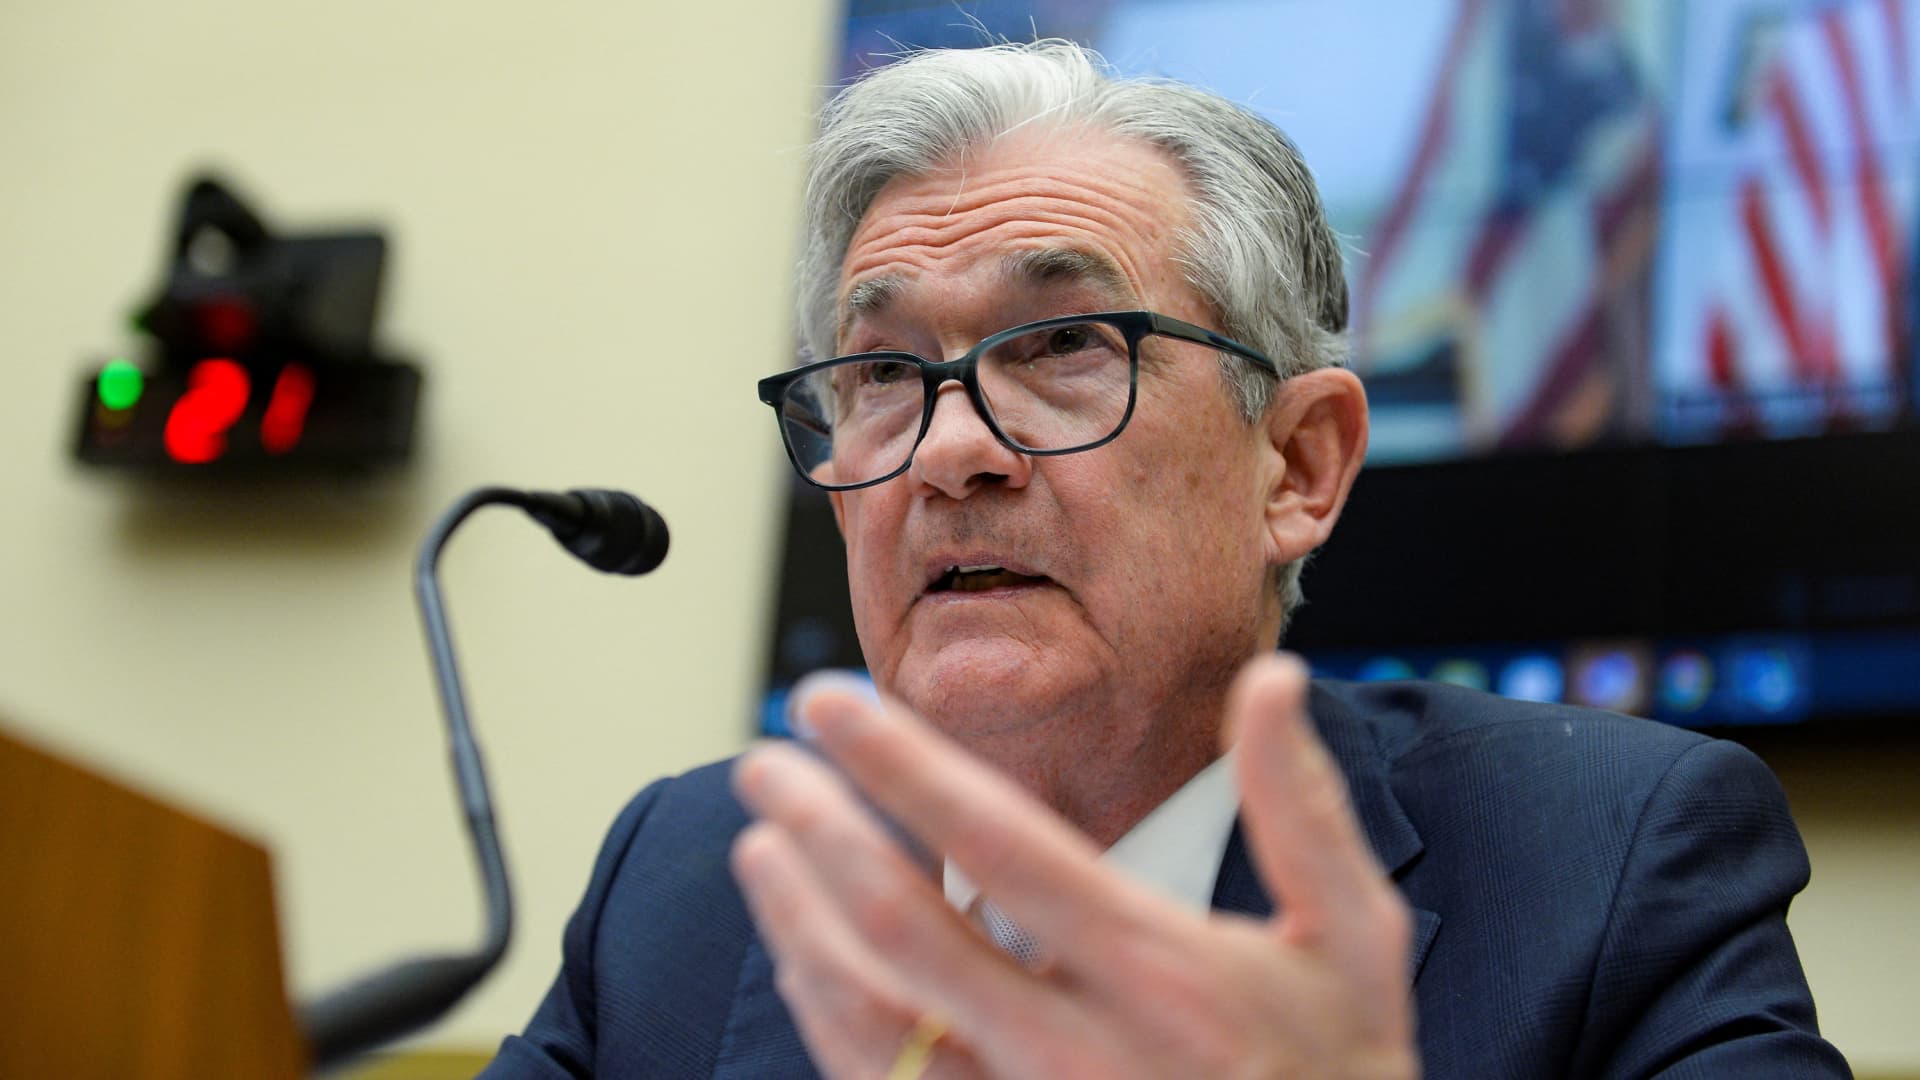 Powell vows to prevent inflation from taking long-run hold in the U.S.